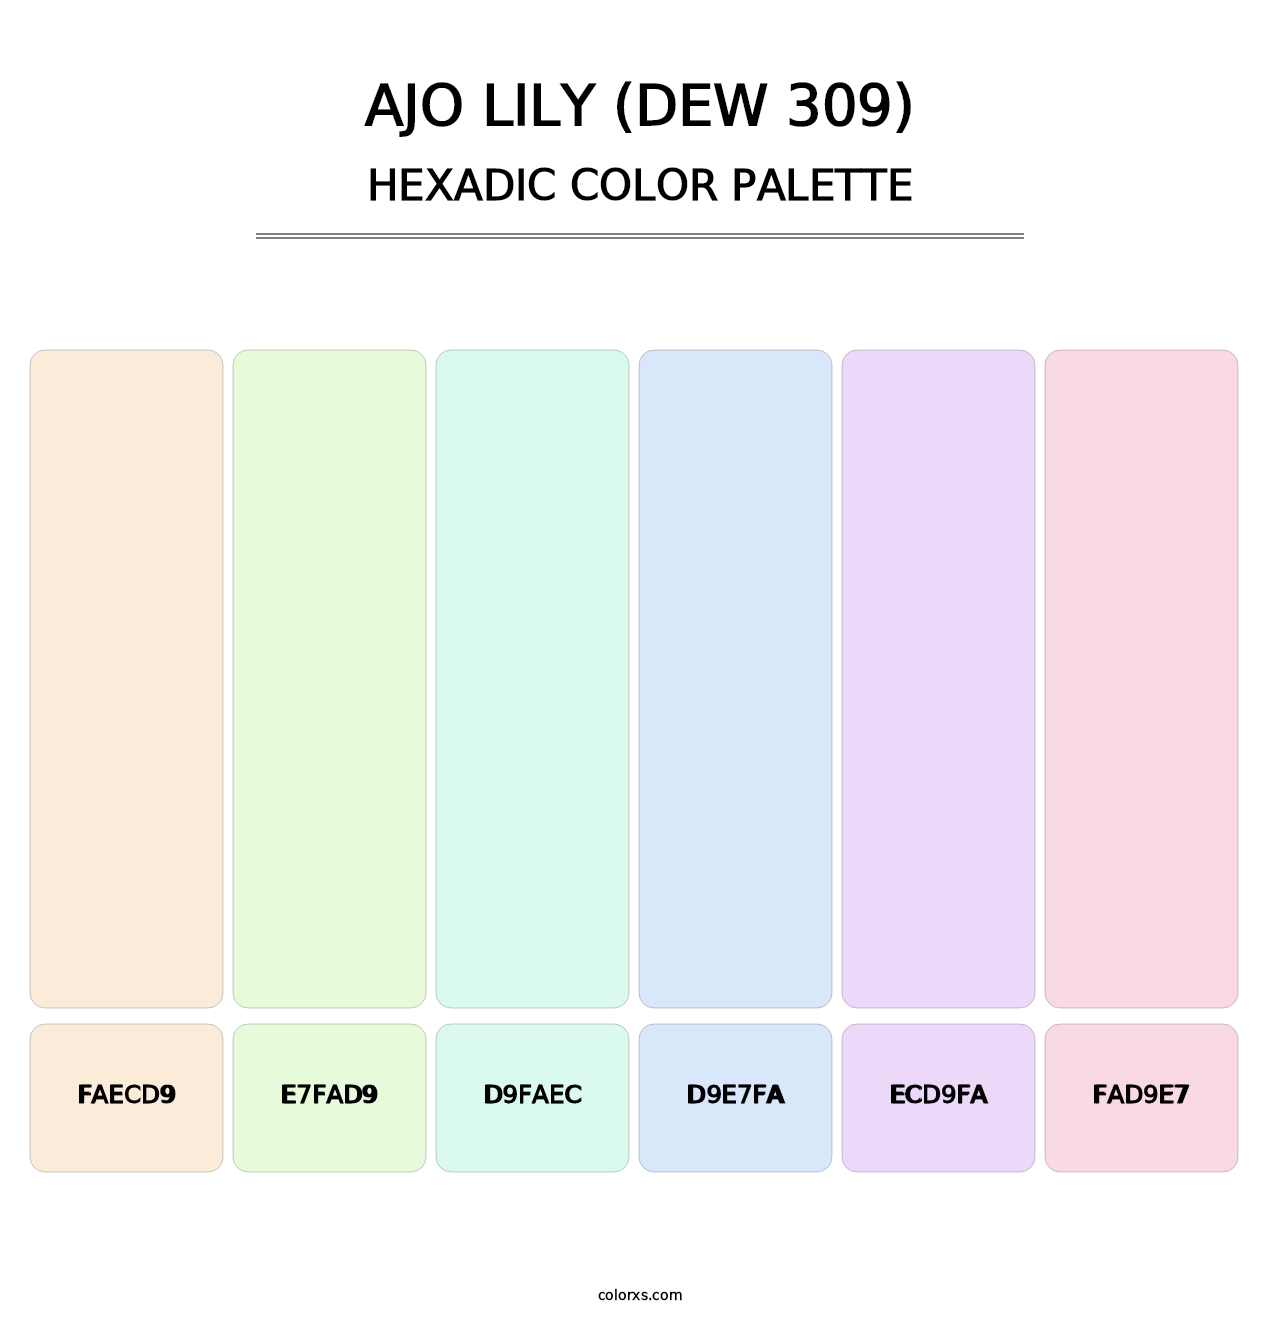 Ajo Lily (DEW 309) - Hexadic Color Palette